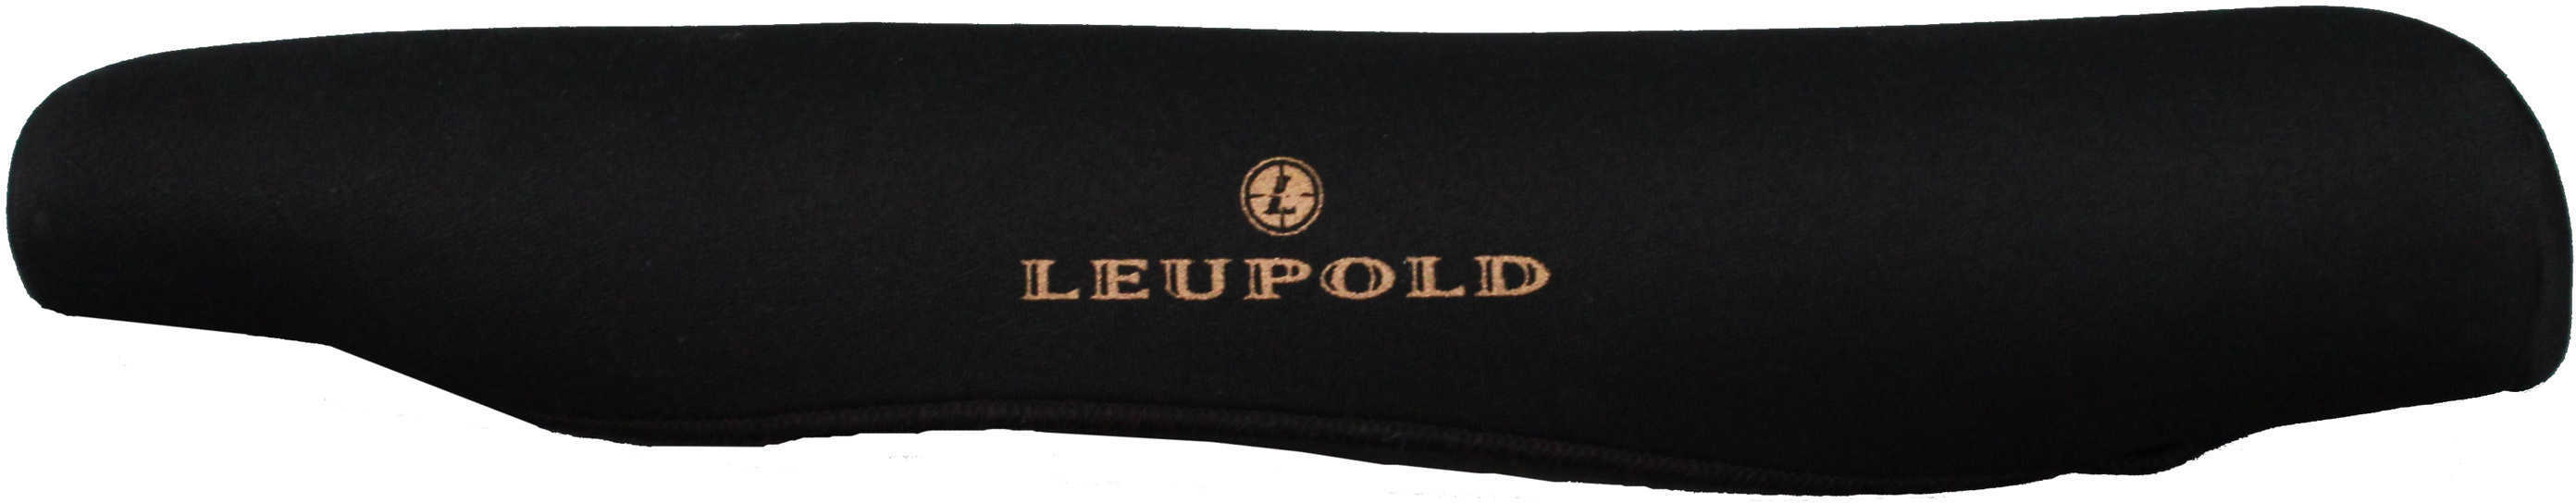 Leupold Scope Cover - Xx-Large Water-Resistant, Nylon-Laminate Neoprene - Protect Your Scope's Finish From Dirt And dama